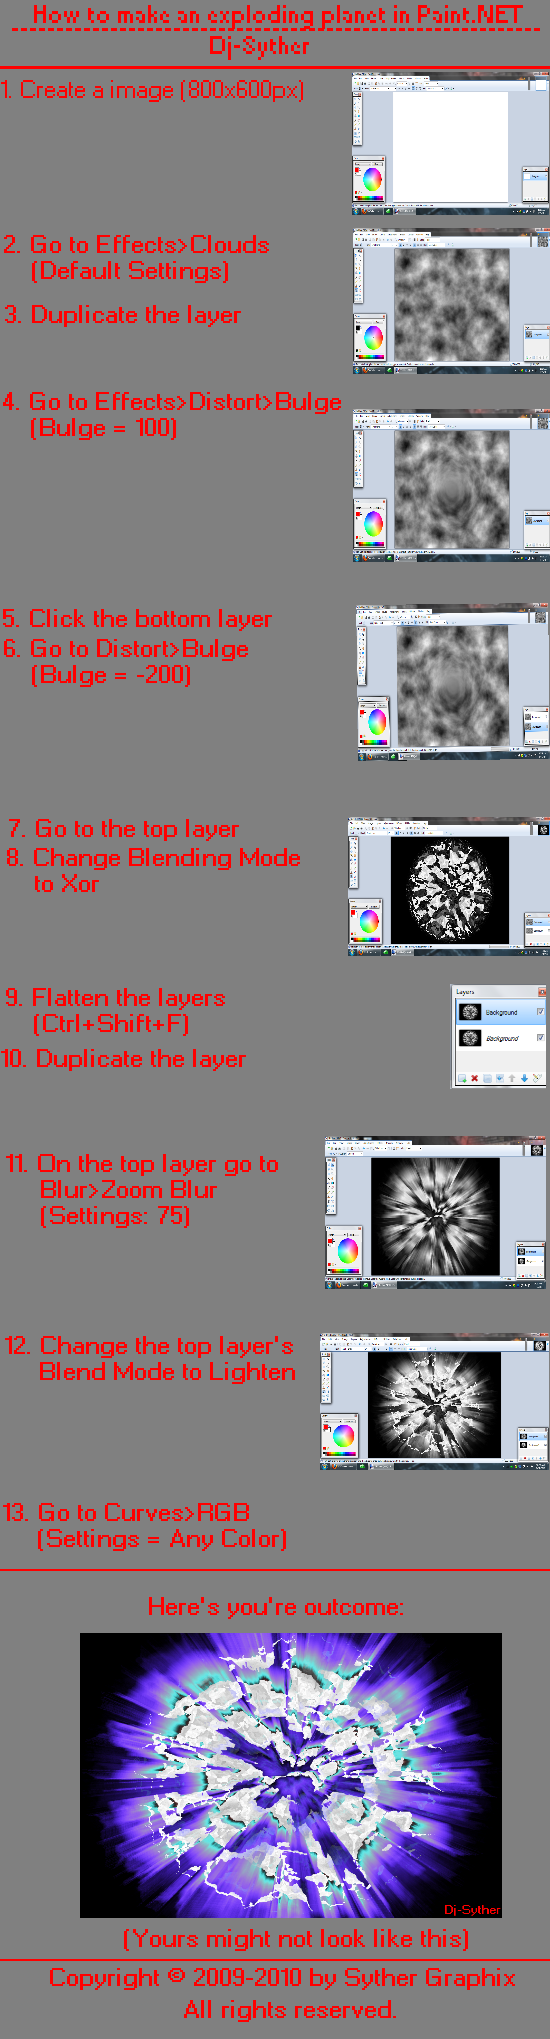 PDN_Exploding_Planet_Tutorial_by_Dj_Syther.png